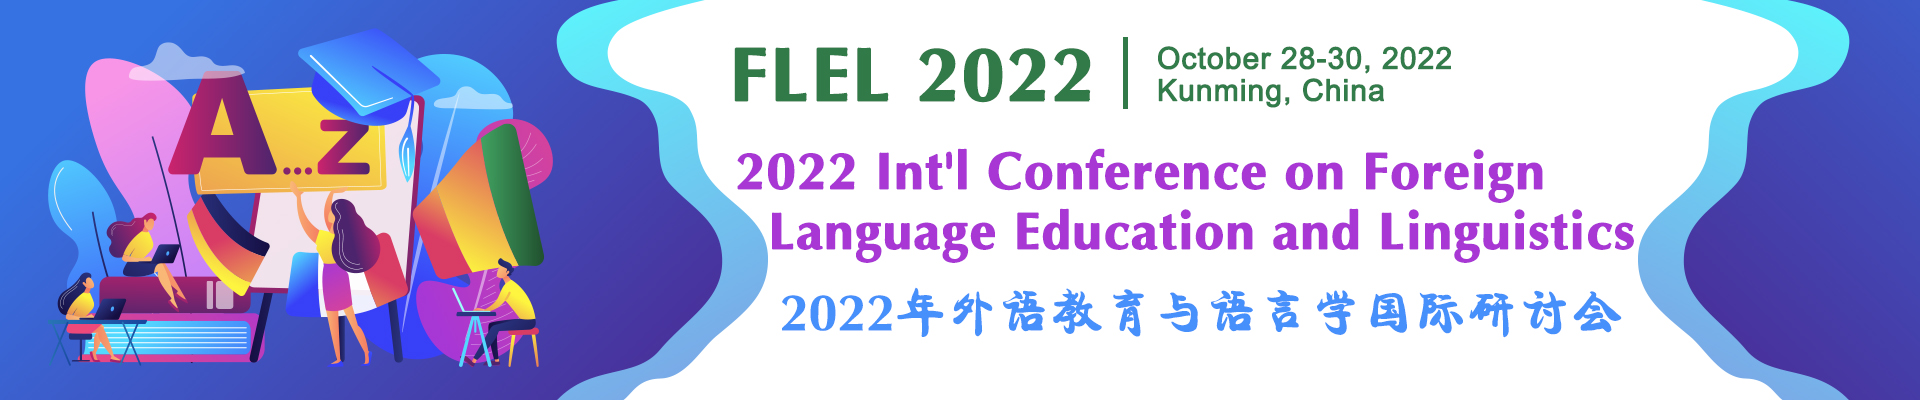 2022 Int'l Conference on Foreign Language Education and Linguistics(FLEL 2022), Kunming Jin Jiang Hotel, Yunnan, China